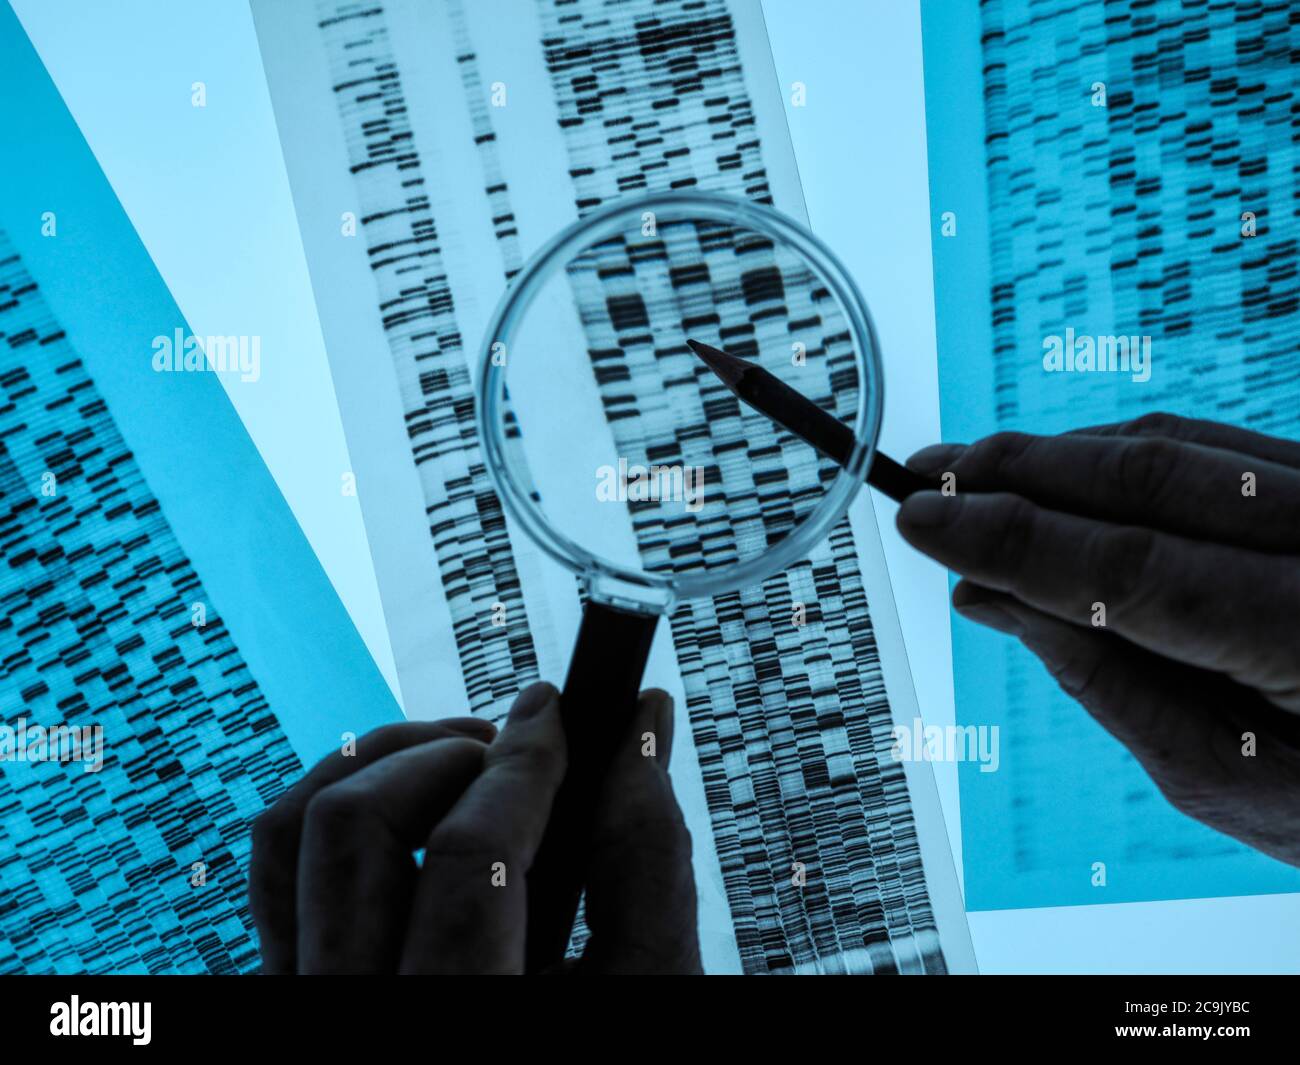 Scientist using a magnifying glass to view banding on a DNA (deoxyribonucleic acid) profile. Stock Photo